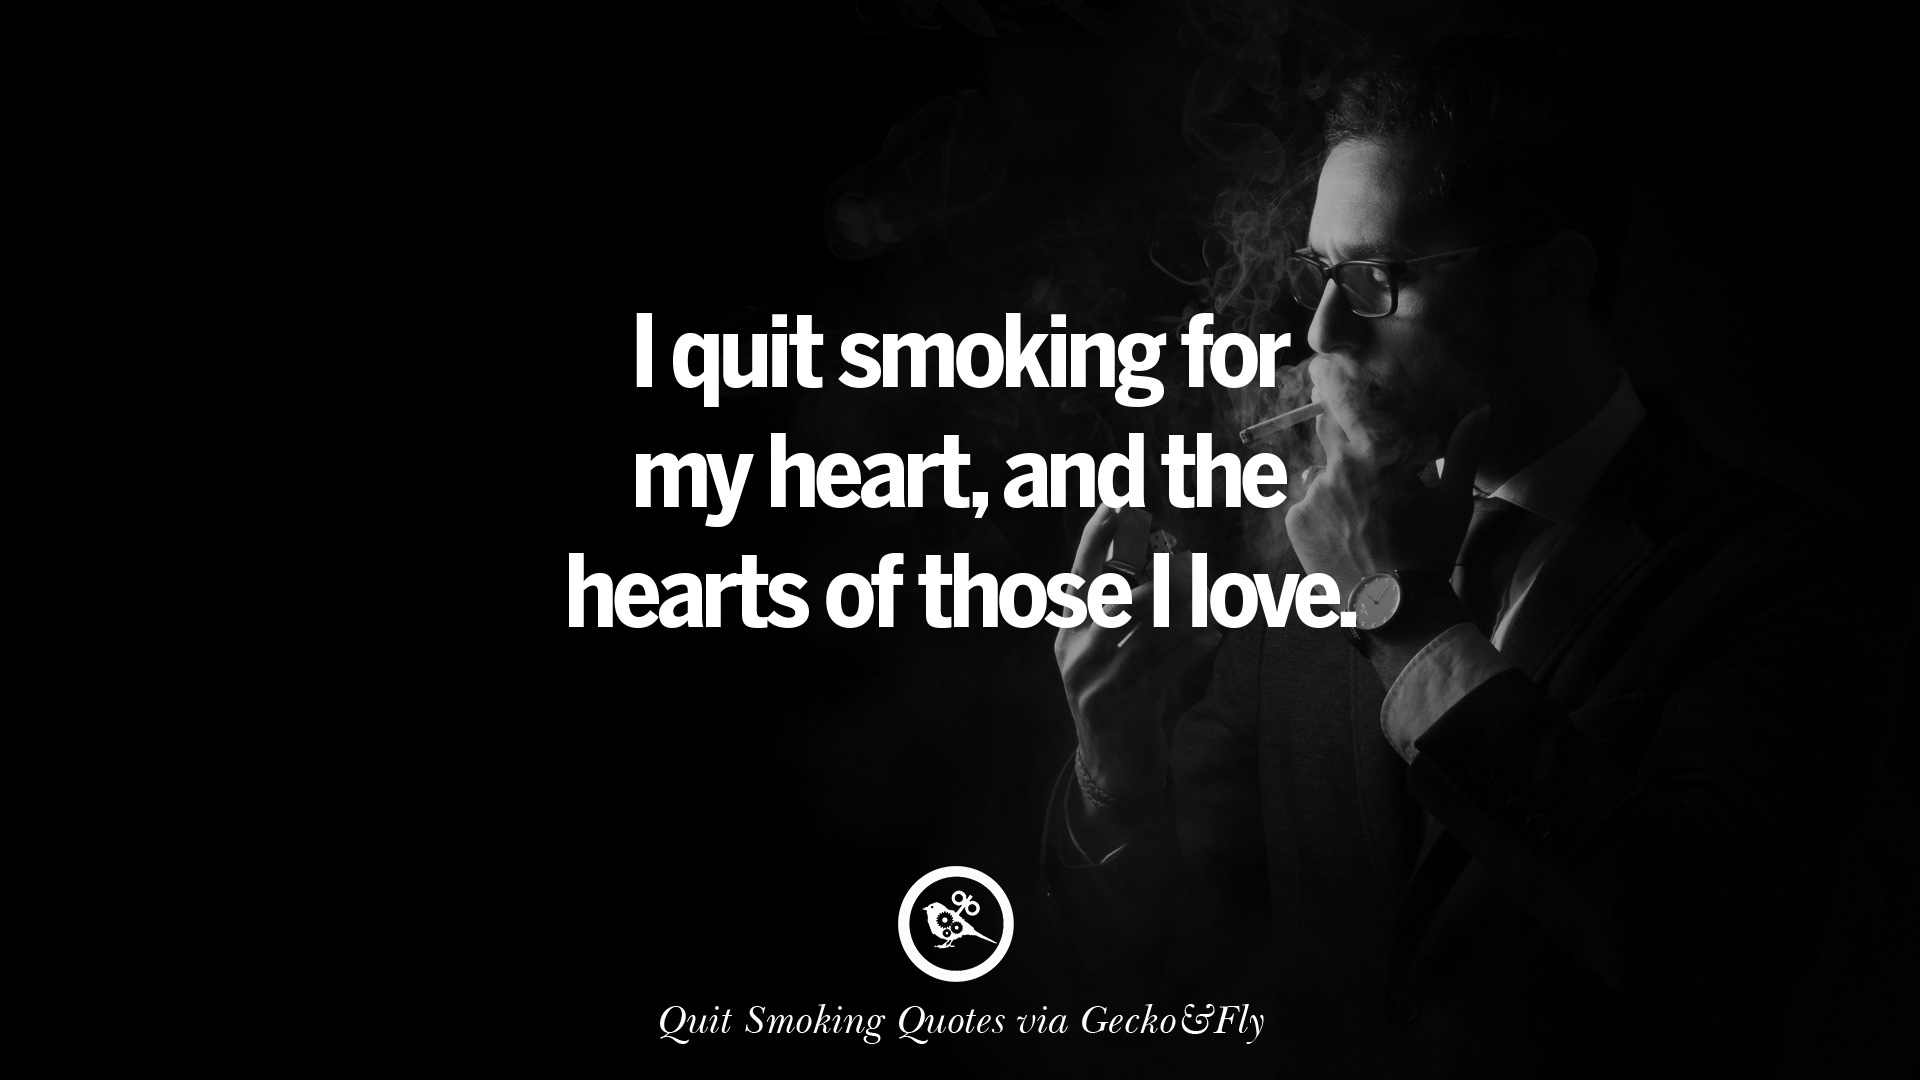 20 Motivational  Slogans To Help You Quit Smoking  And Stop  